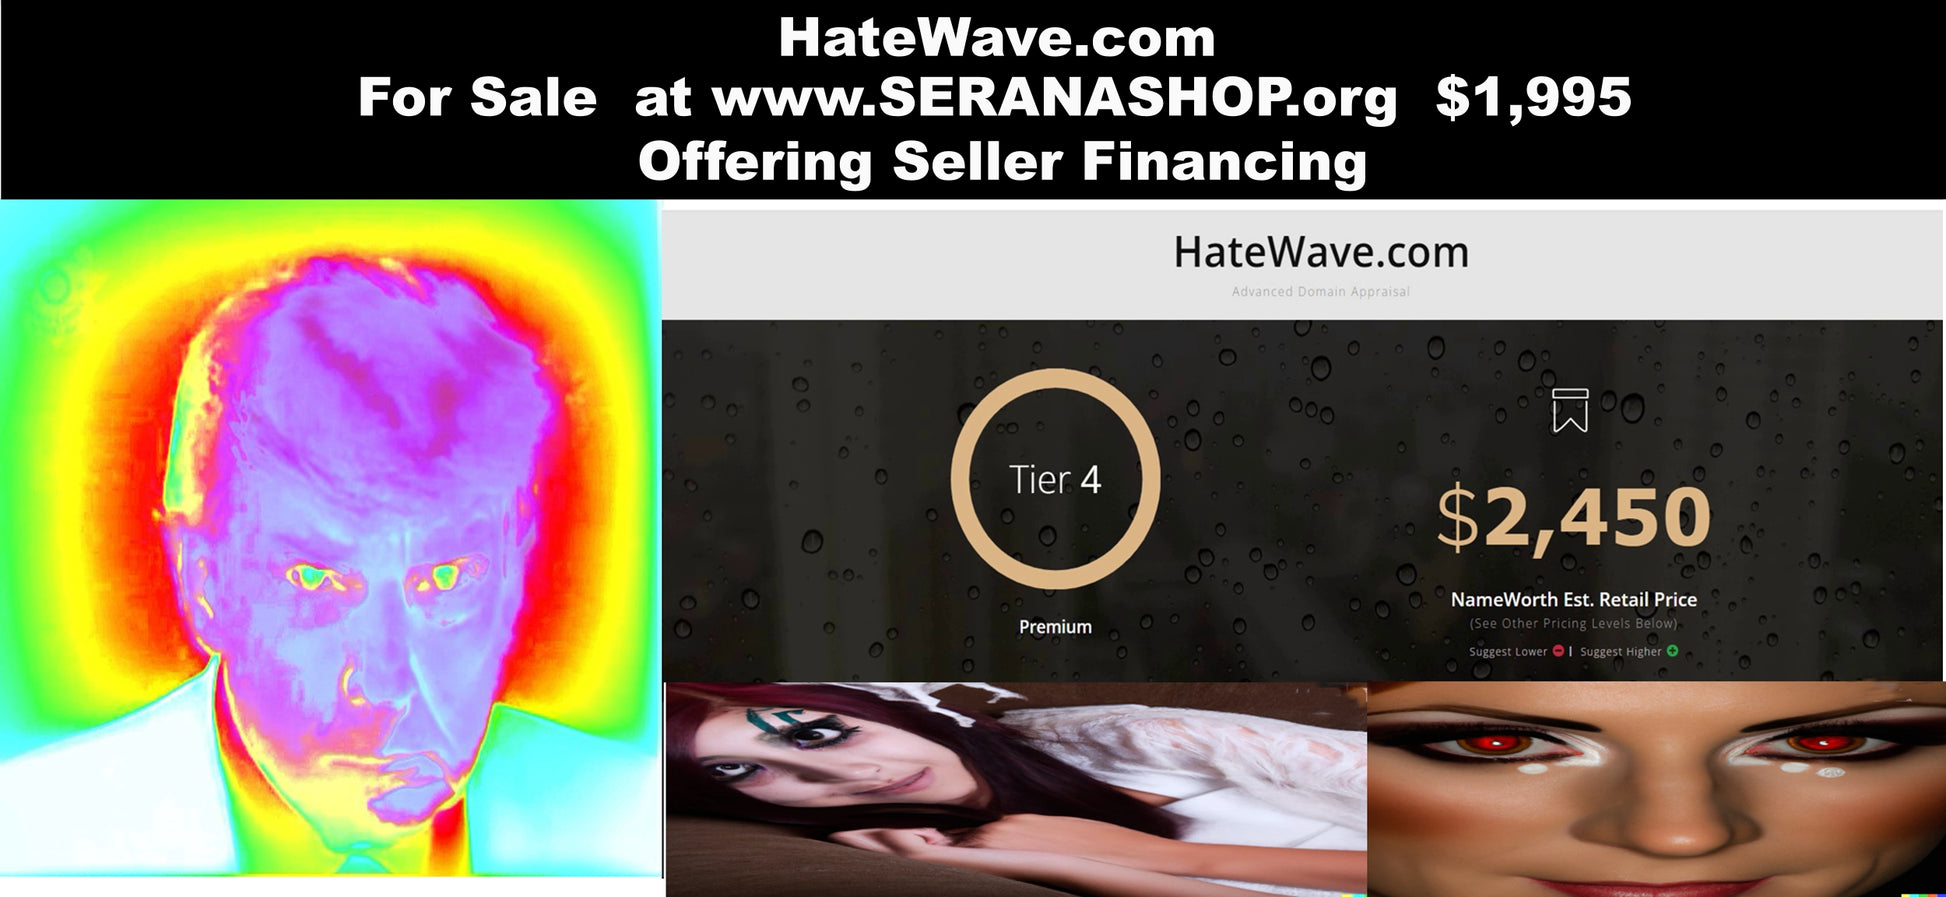 HateWave.com $1,995 OBO/ Offering Seller Financing - The Cat and Cock Shop